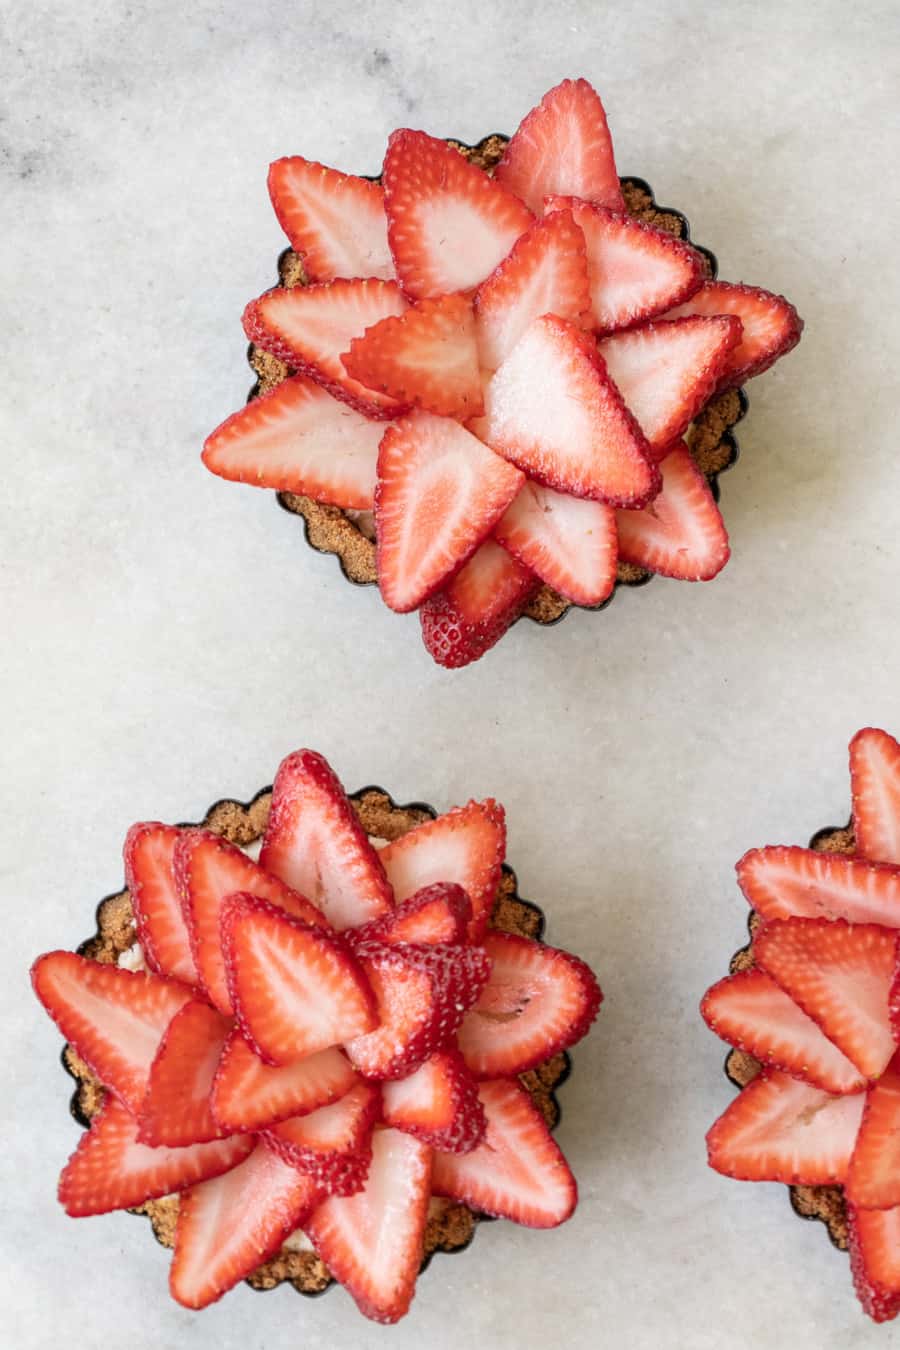 Mini pies with sliced strawberries for the 4th of July.